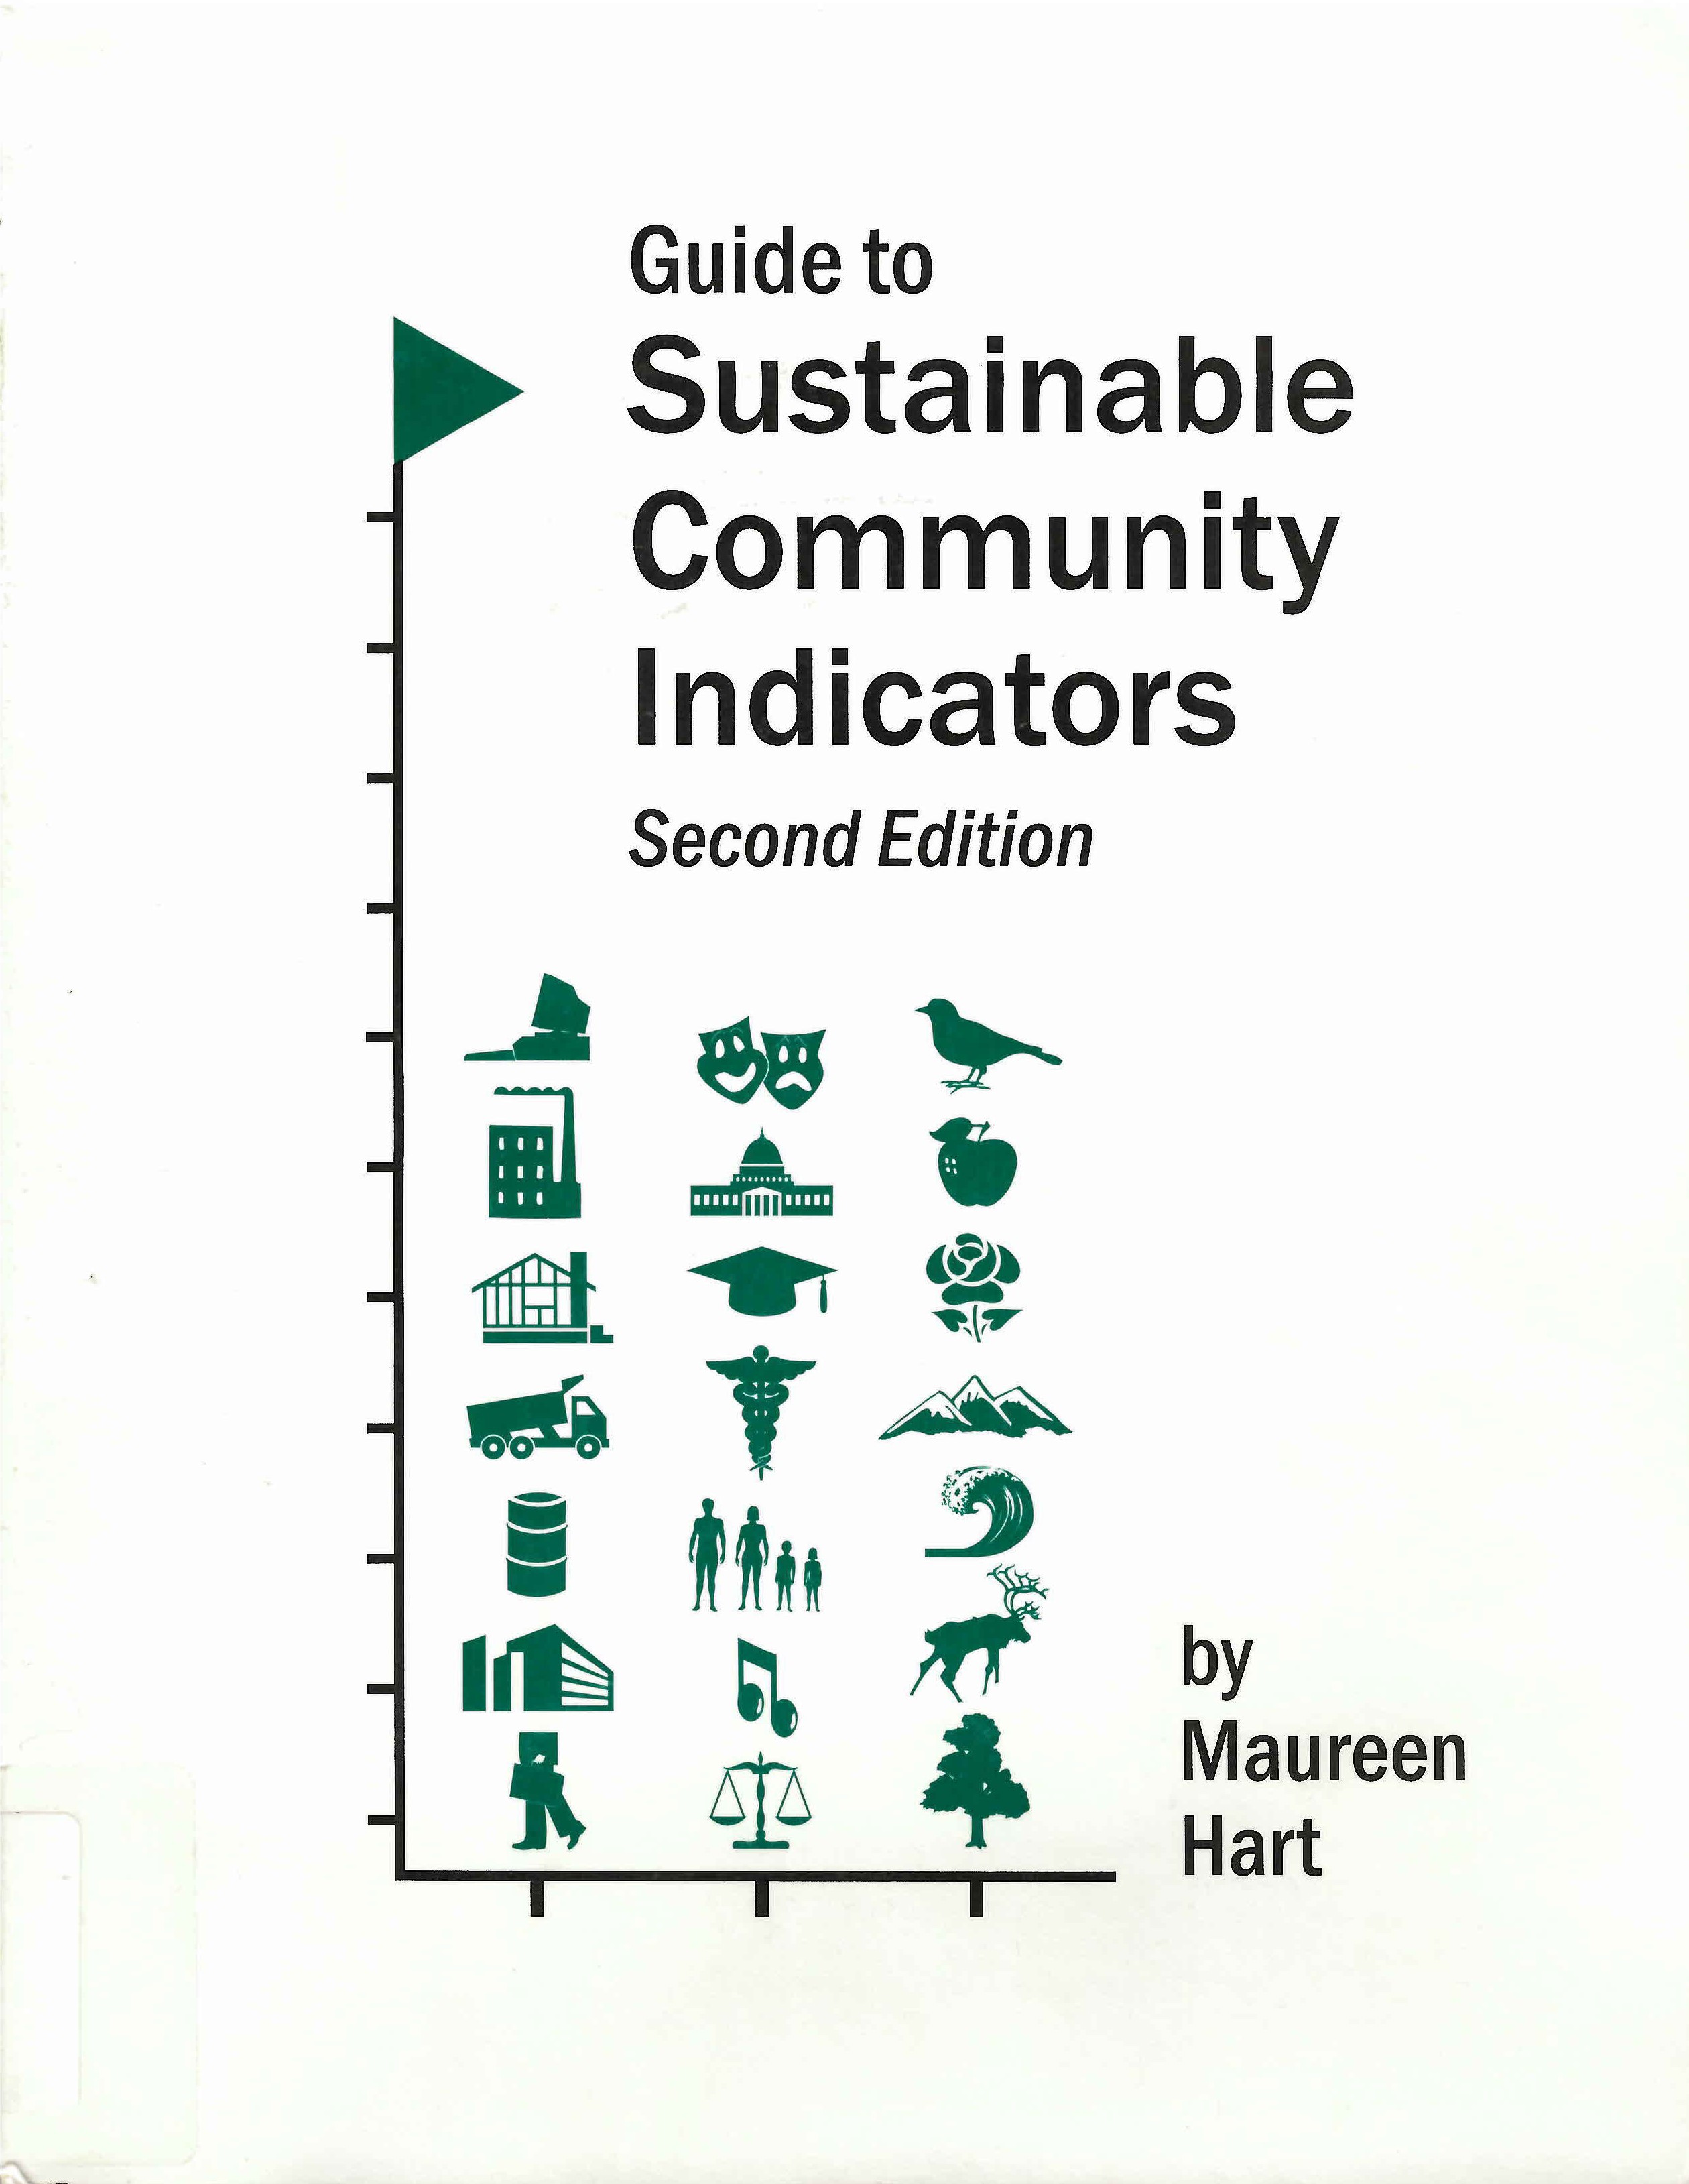 Guide to sustainable community indicators.